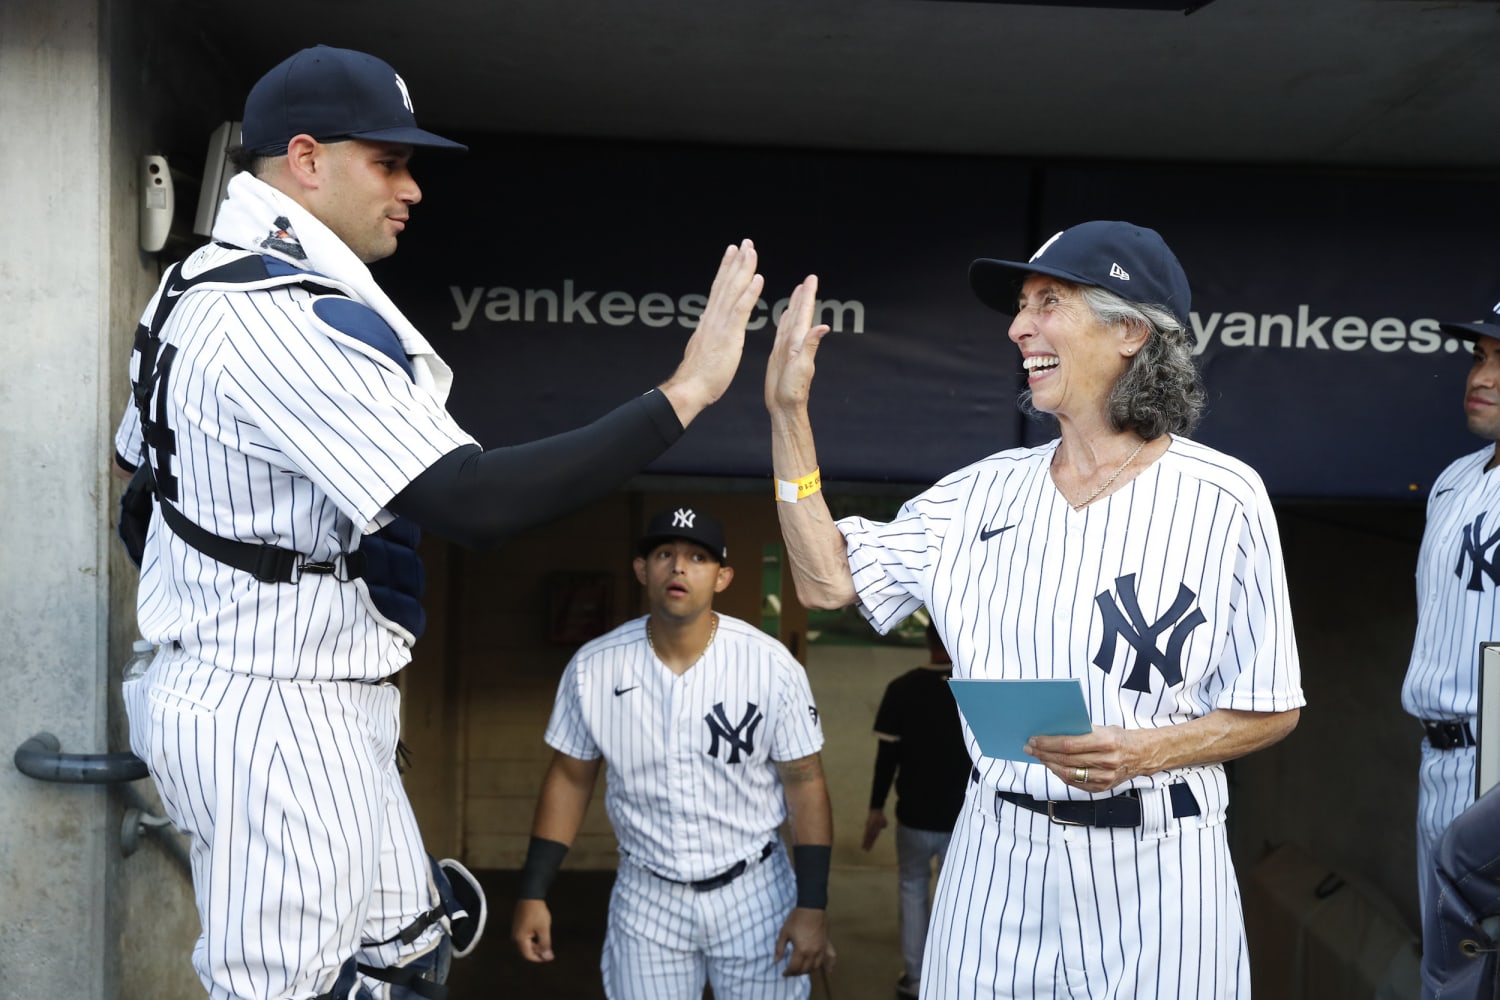 70-year-old New York Yankees fan becomes honorary bat girl